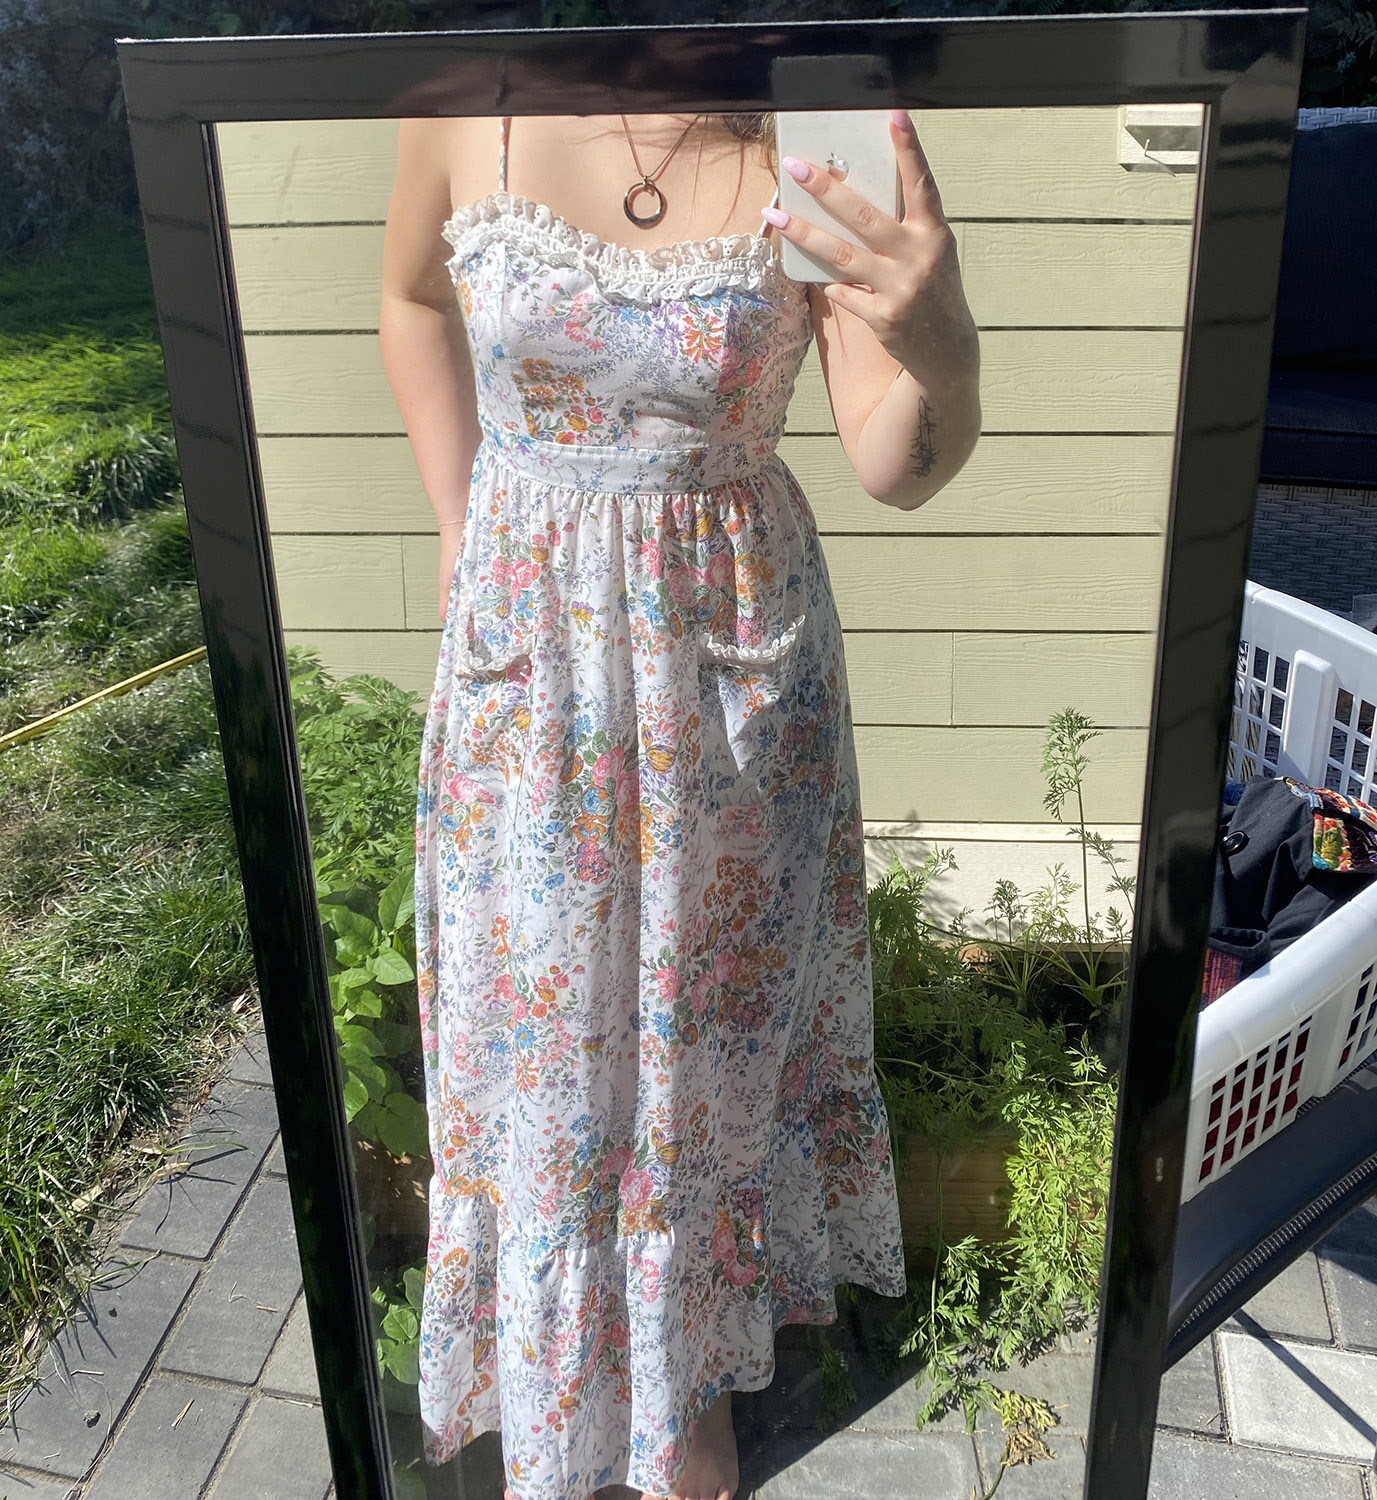 Mirror selfie taken outside featuring a floor-length floral patterned white and rosy dress.